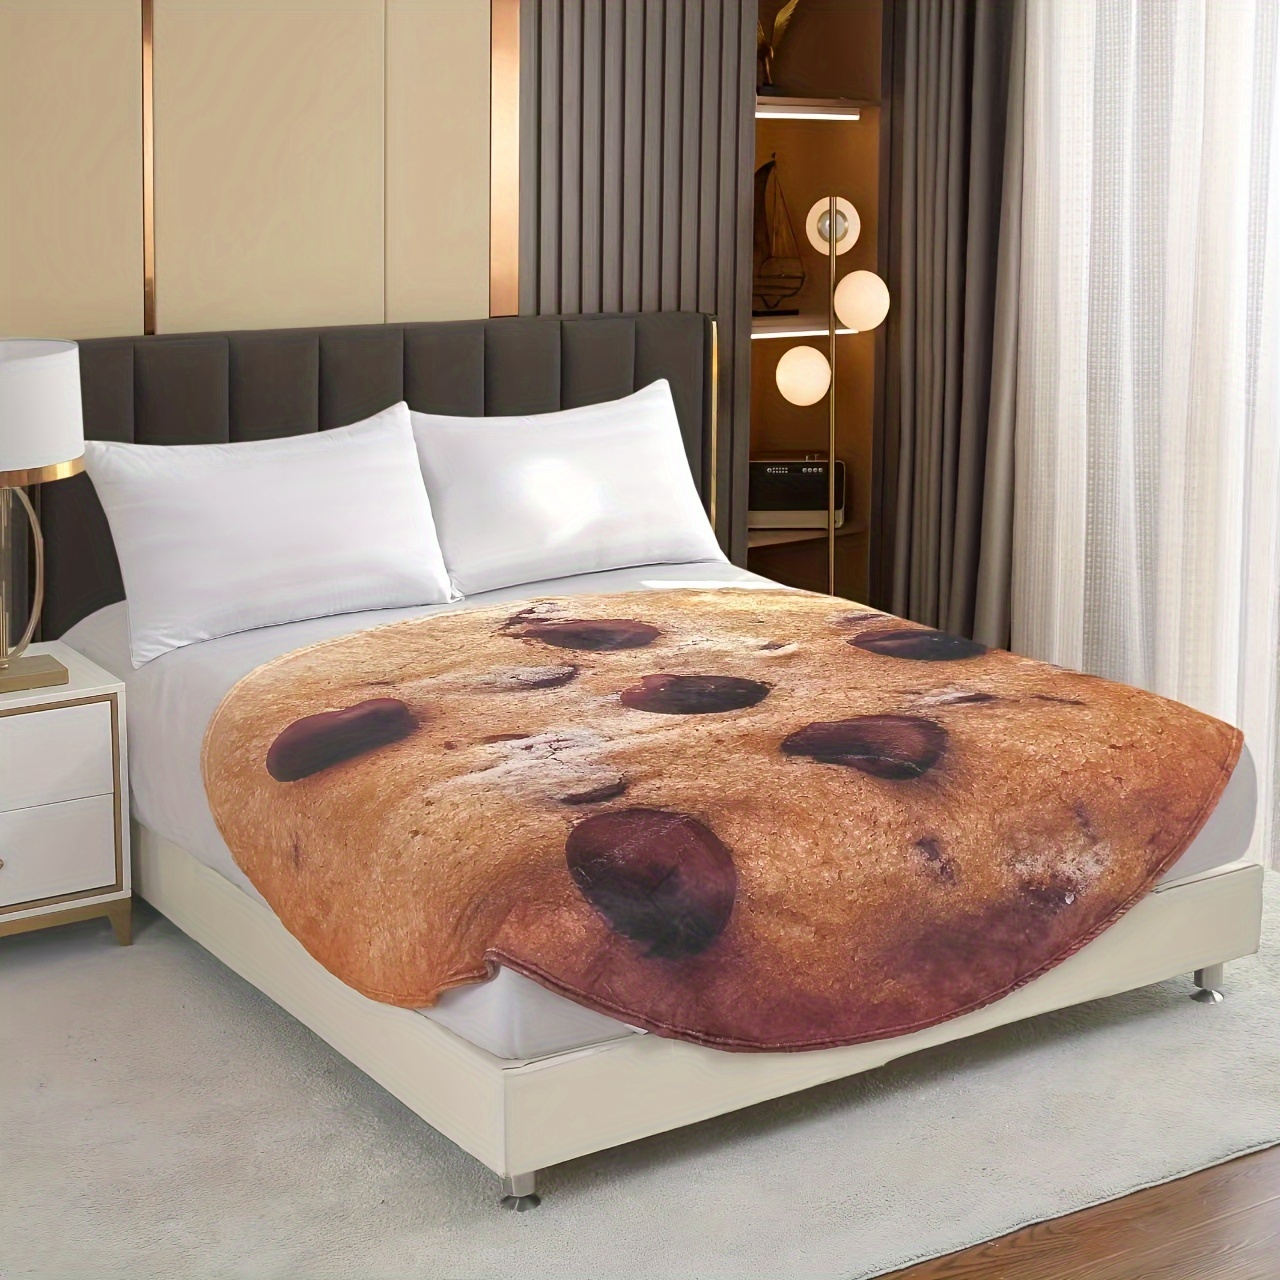 HOT Pepperoni Pizza / Donut Bed Blanket Soft Wrap Sleep Sheet For Home  Hotel Use